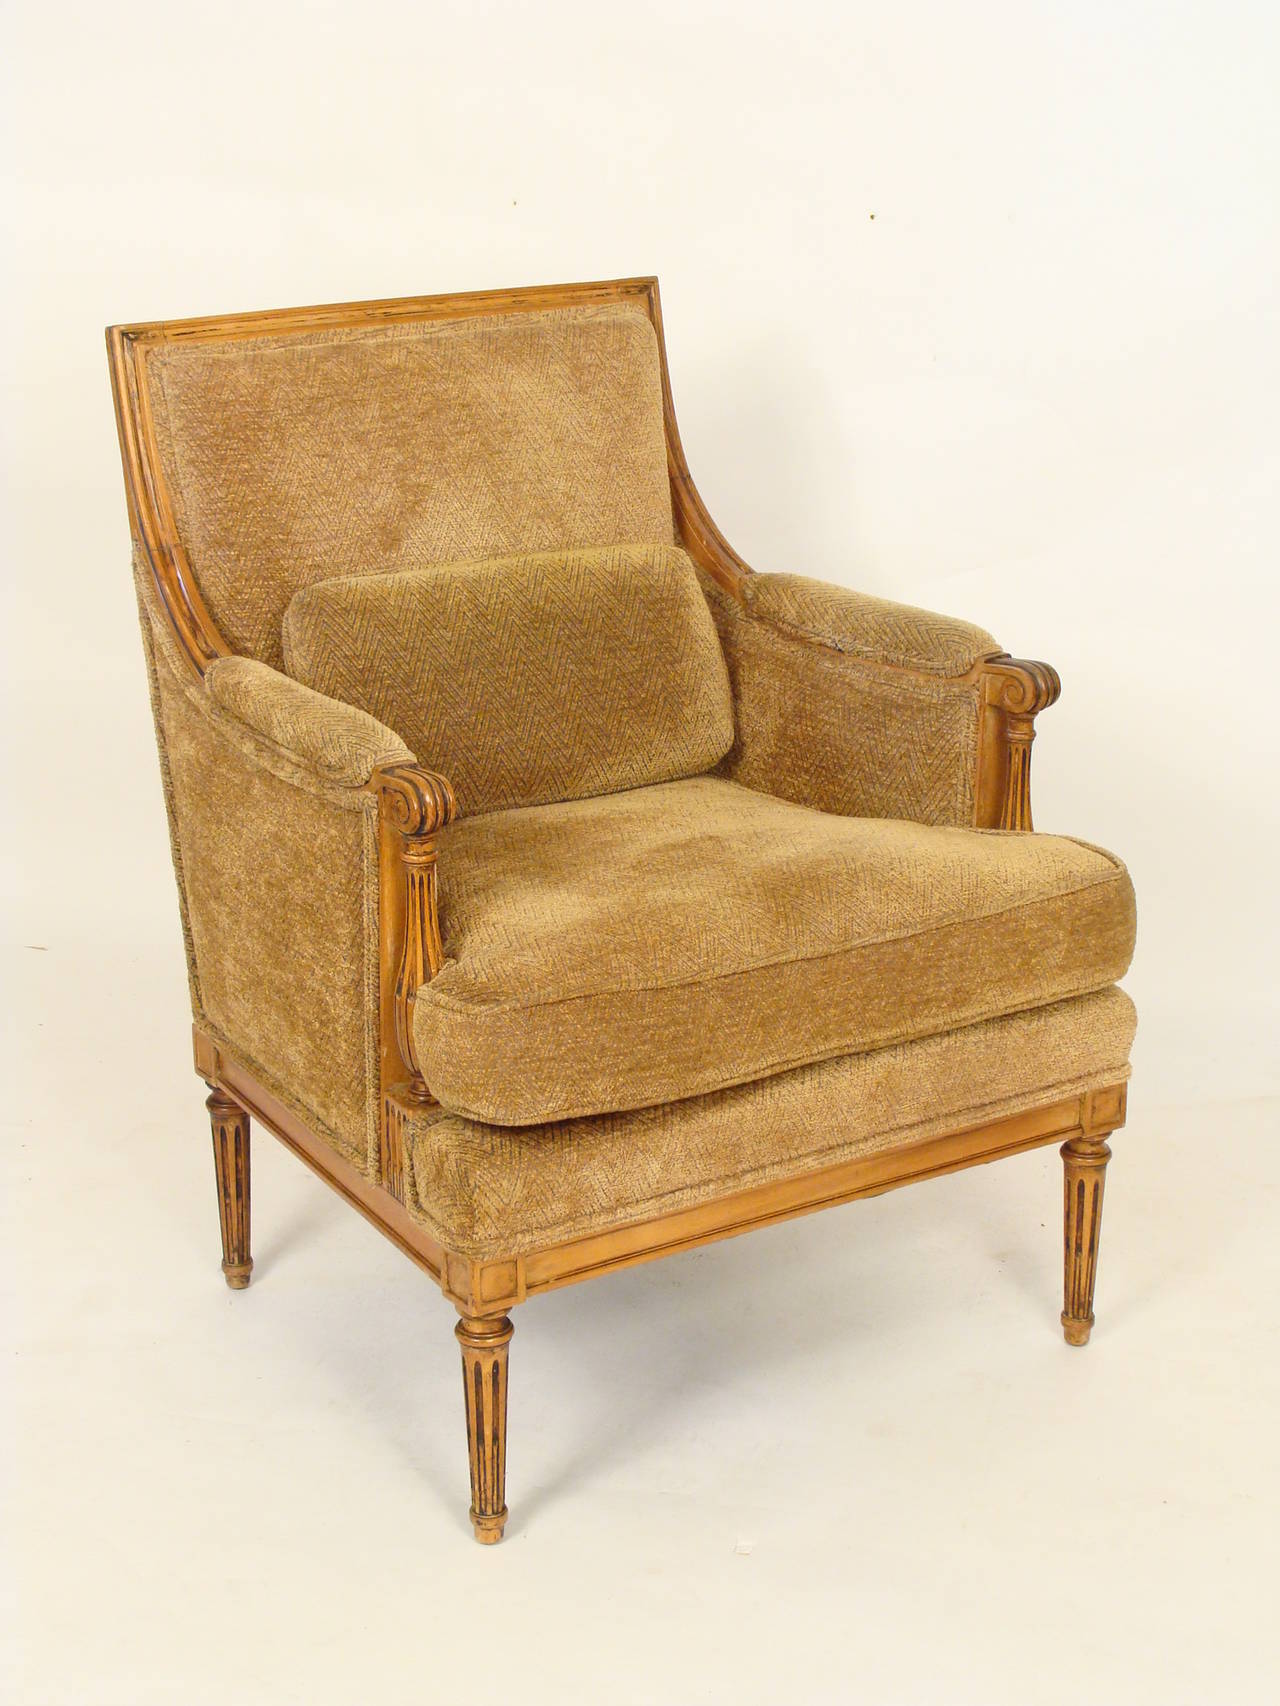 Pair of Louis XVI style fruitwood bergères, circa 1930-1950. The frames on these chairs have excellent color. These chairs are very comfortable.